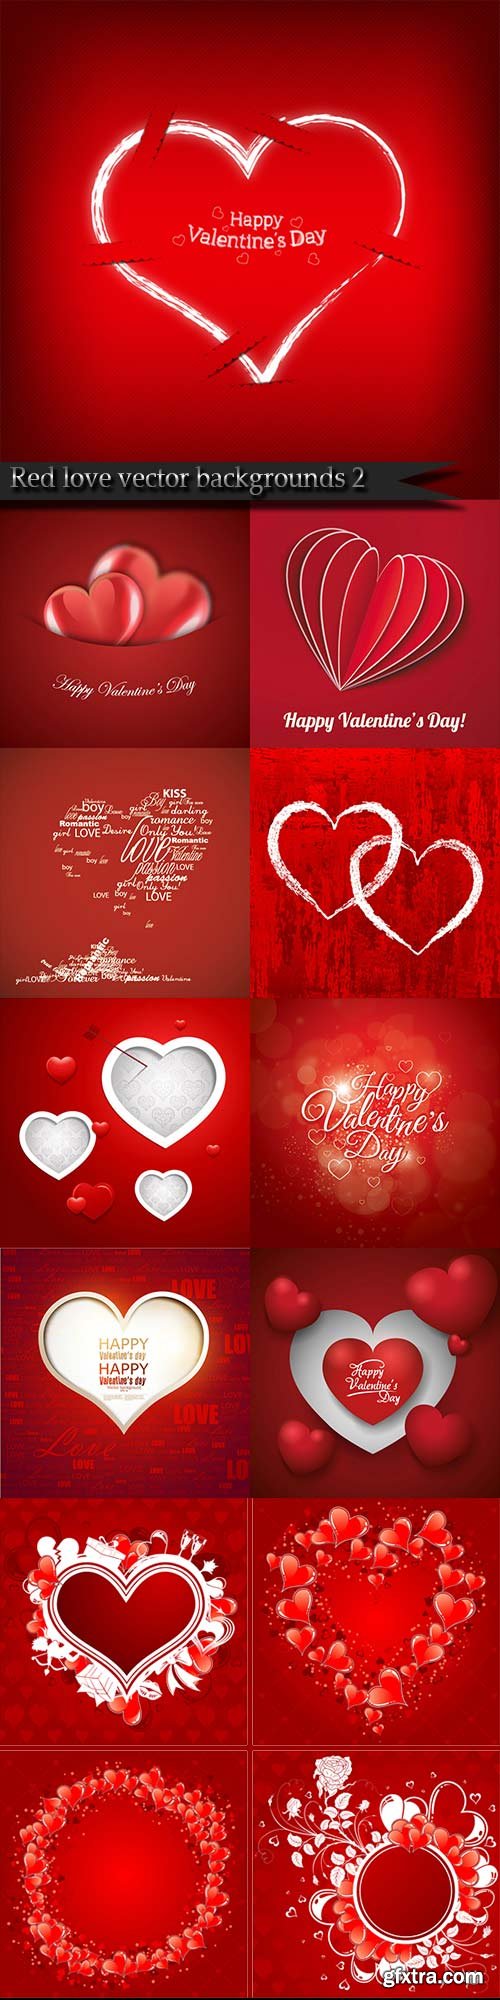 Red love vector backgrounds 2